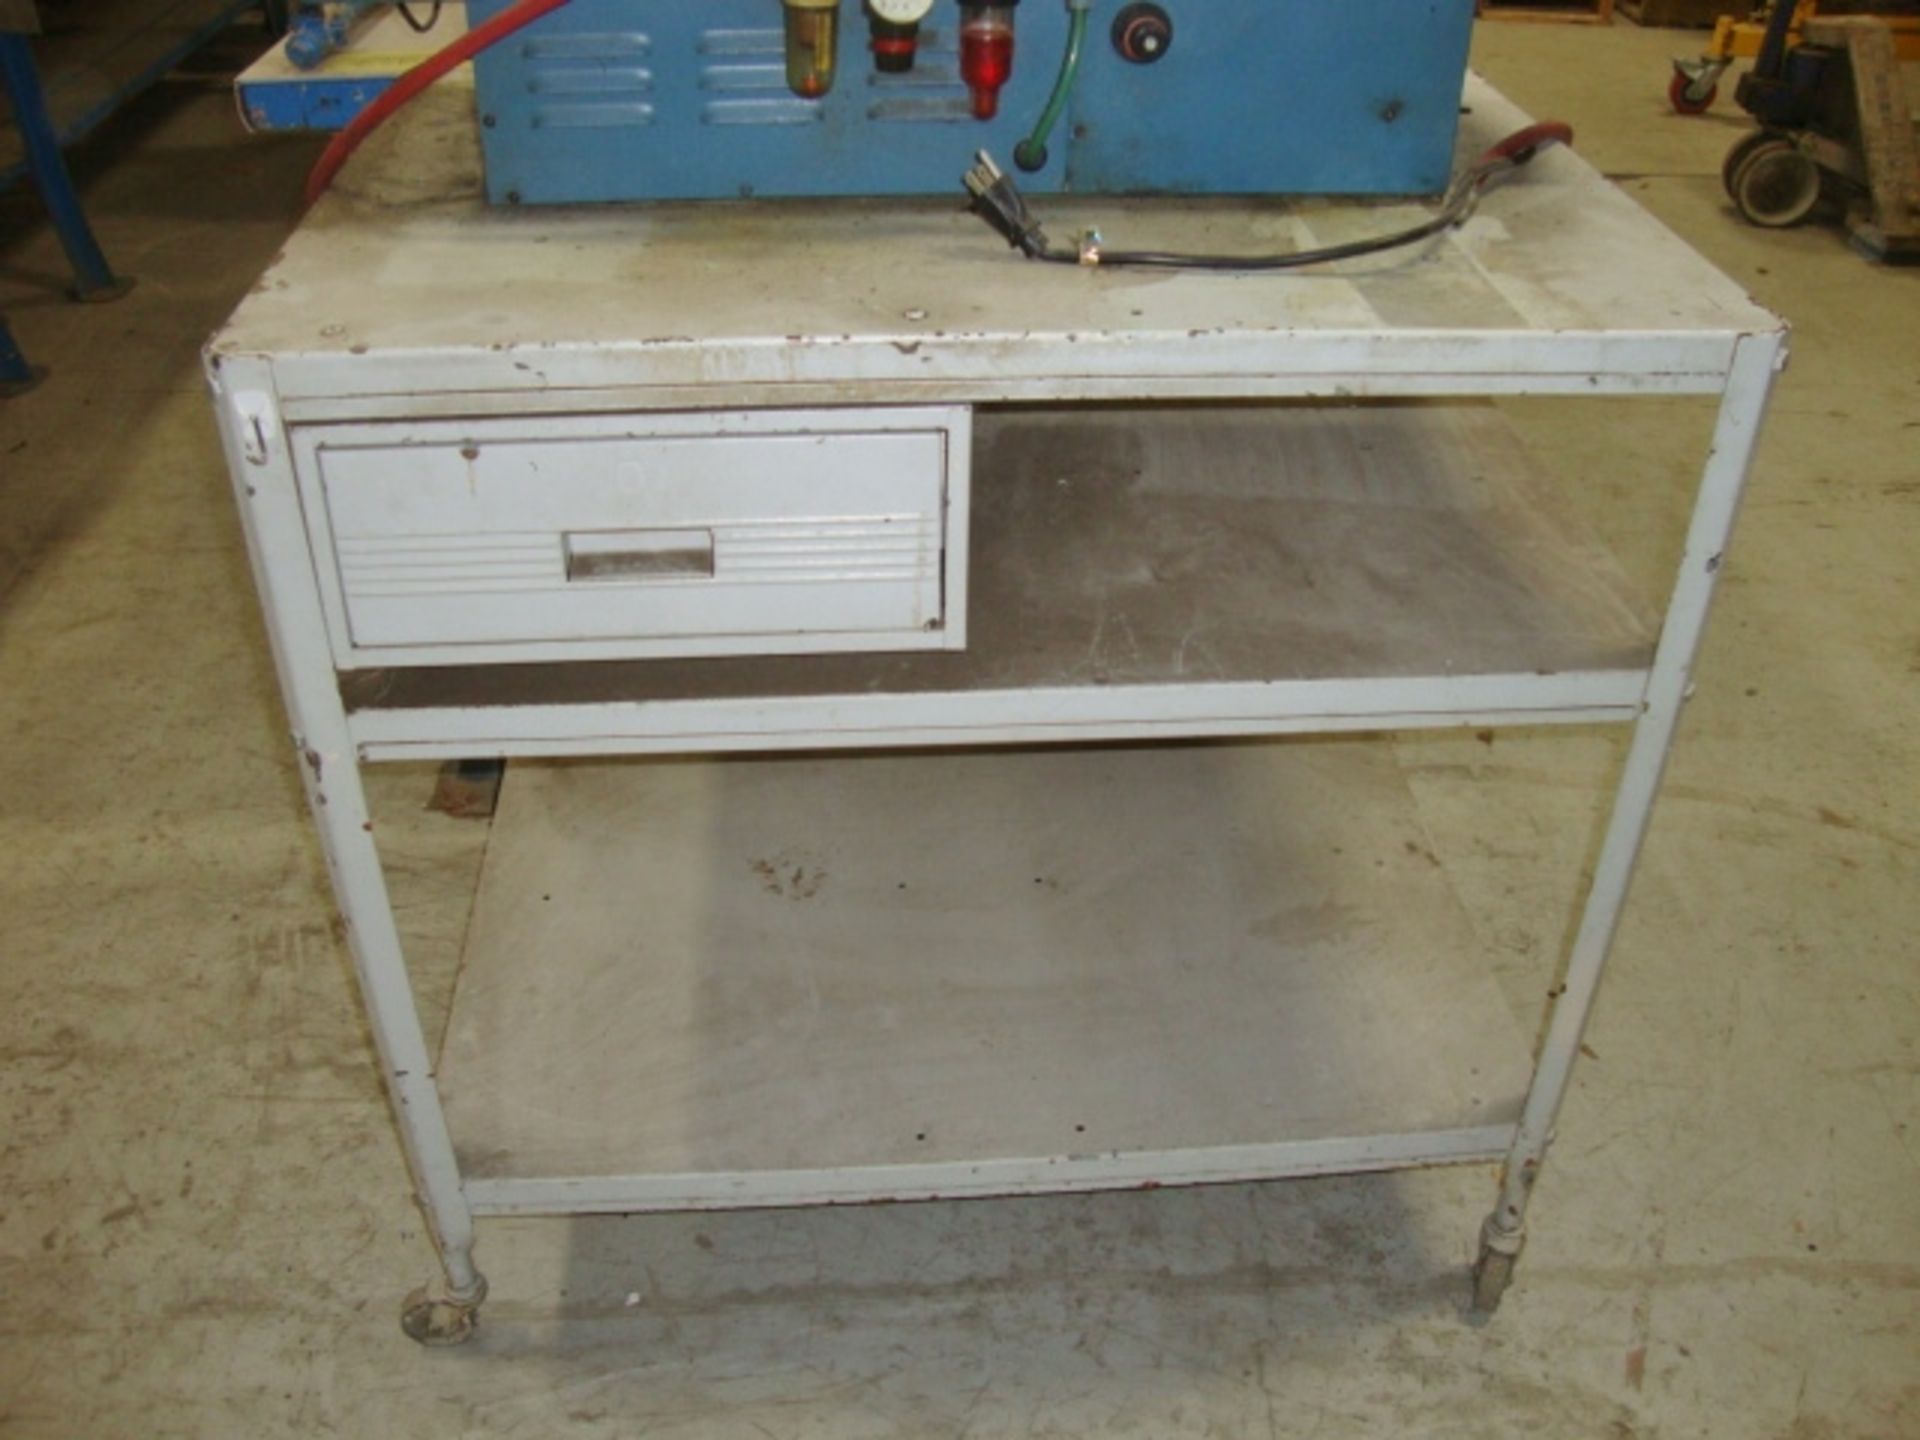 Mobile Steel Work Cart, approx. 36" x 24" x 35" tall